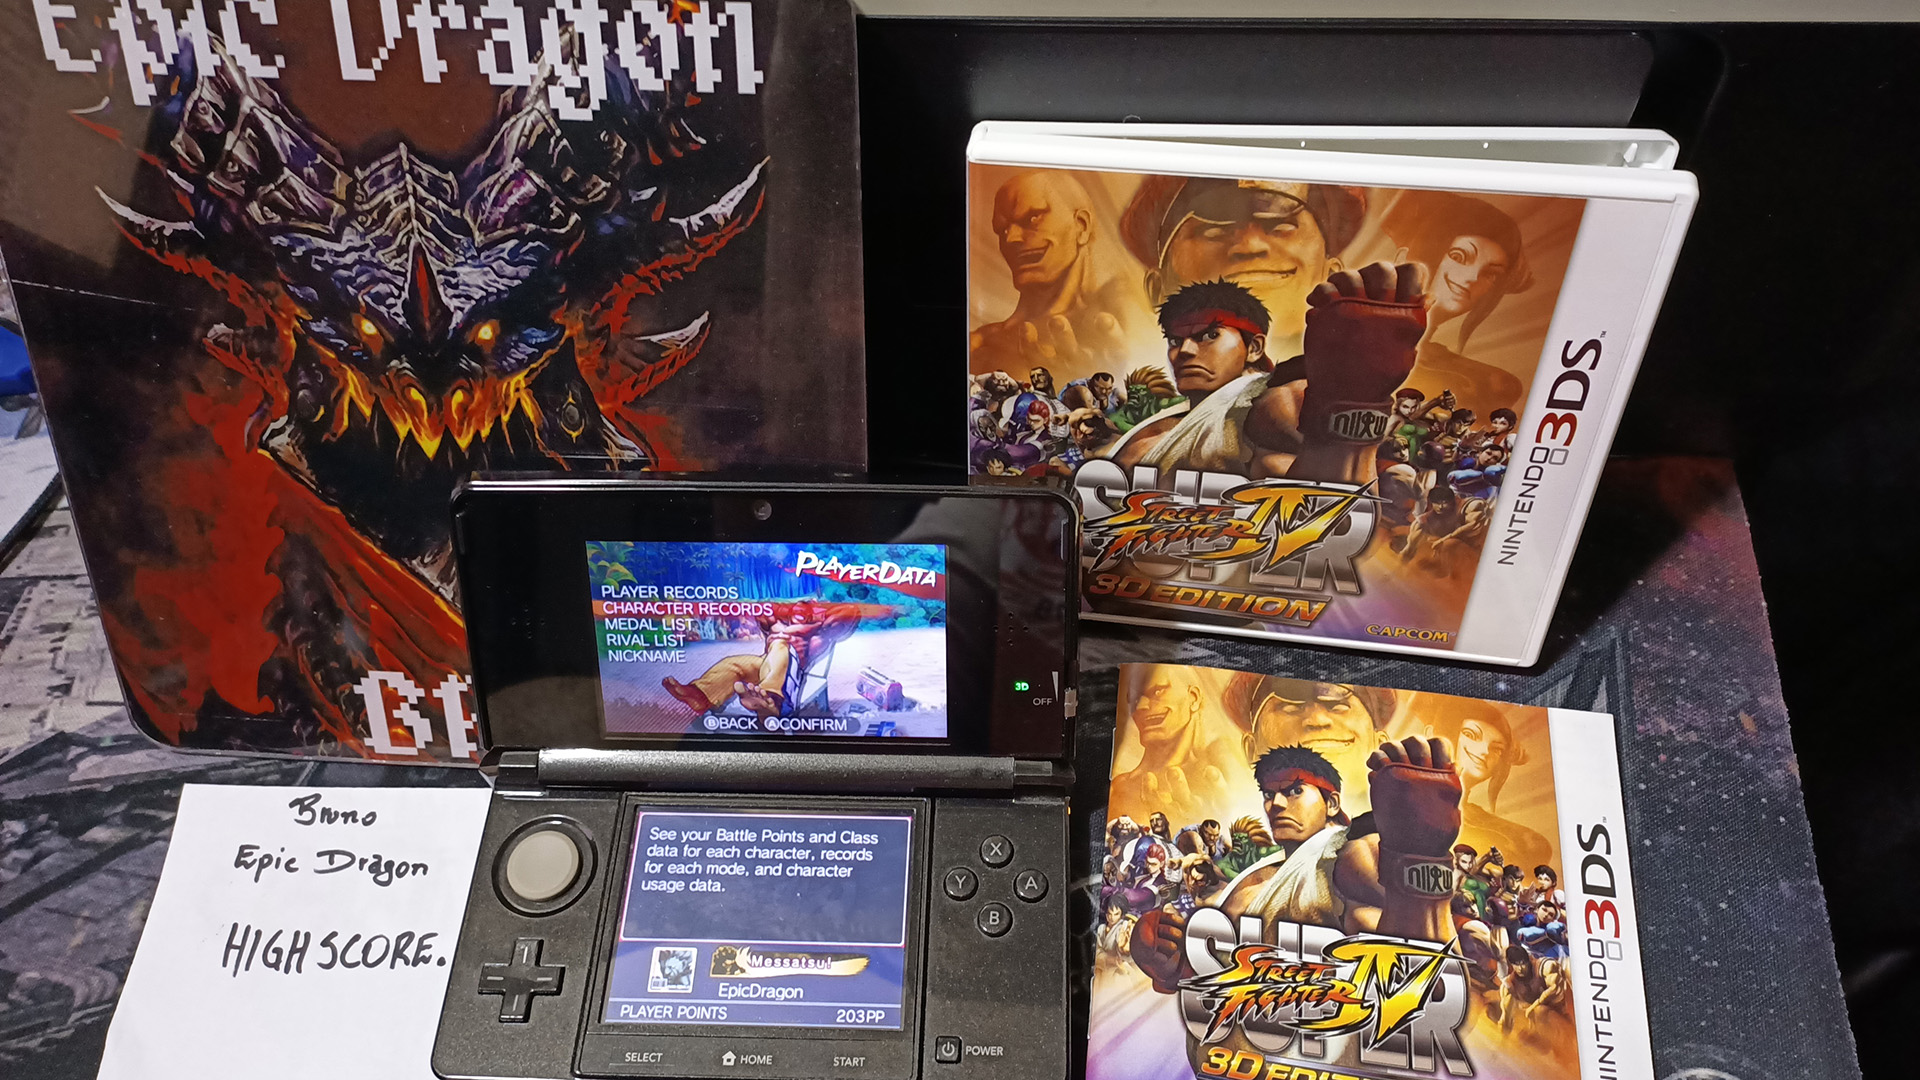 EpicDragon: Super Street Fighter IV 3D Edition: Challenge: Barrel Buster: Fei-Long (Nintendo 3DS) 71,500 points on 2022-08-01 21:00:48